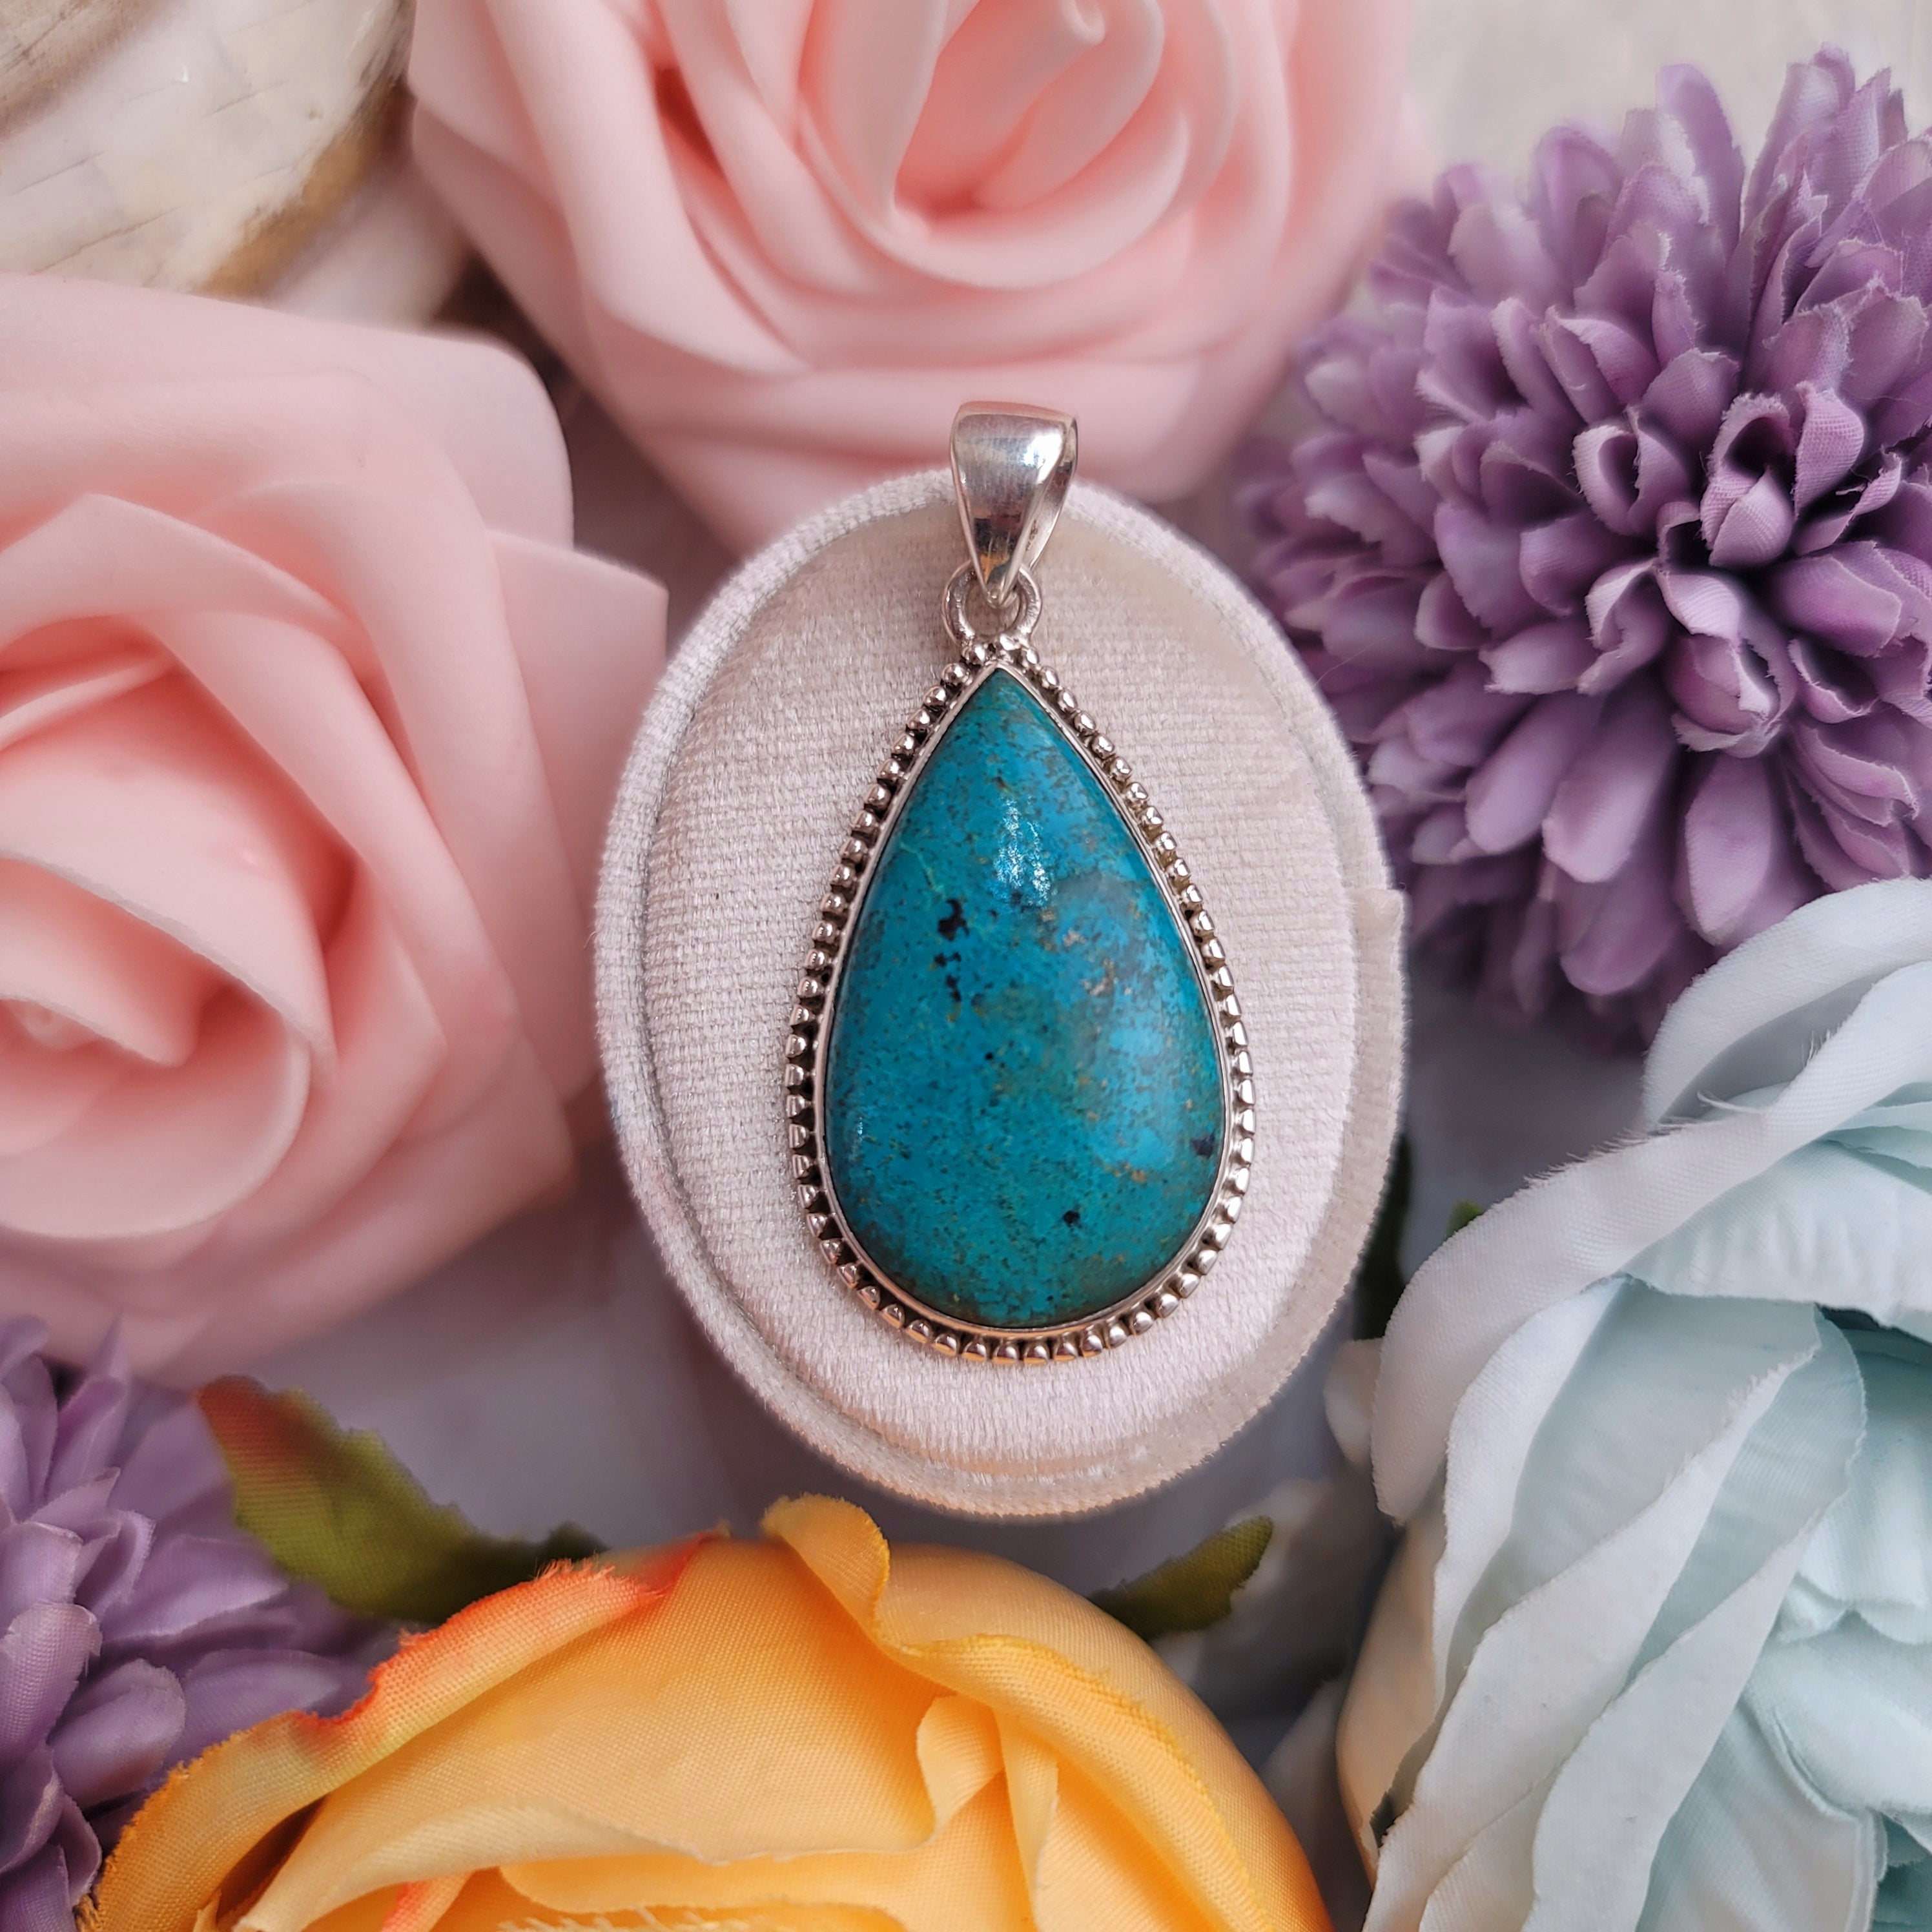 Shattuckite Pendant for Peaceful Communication and Truth